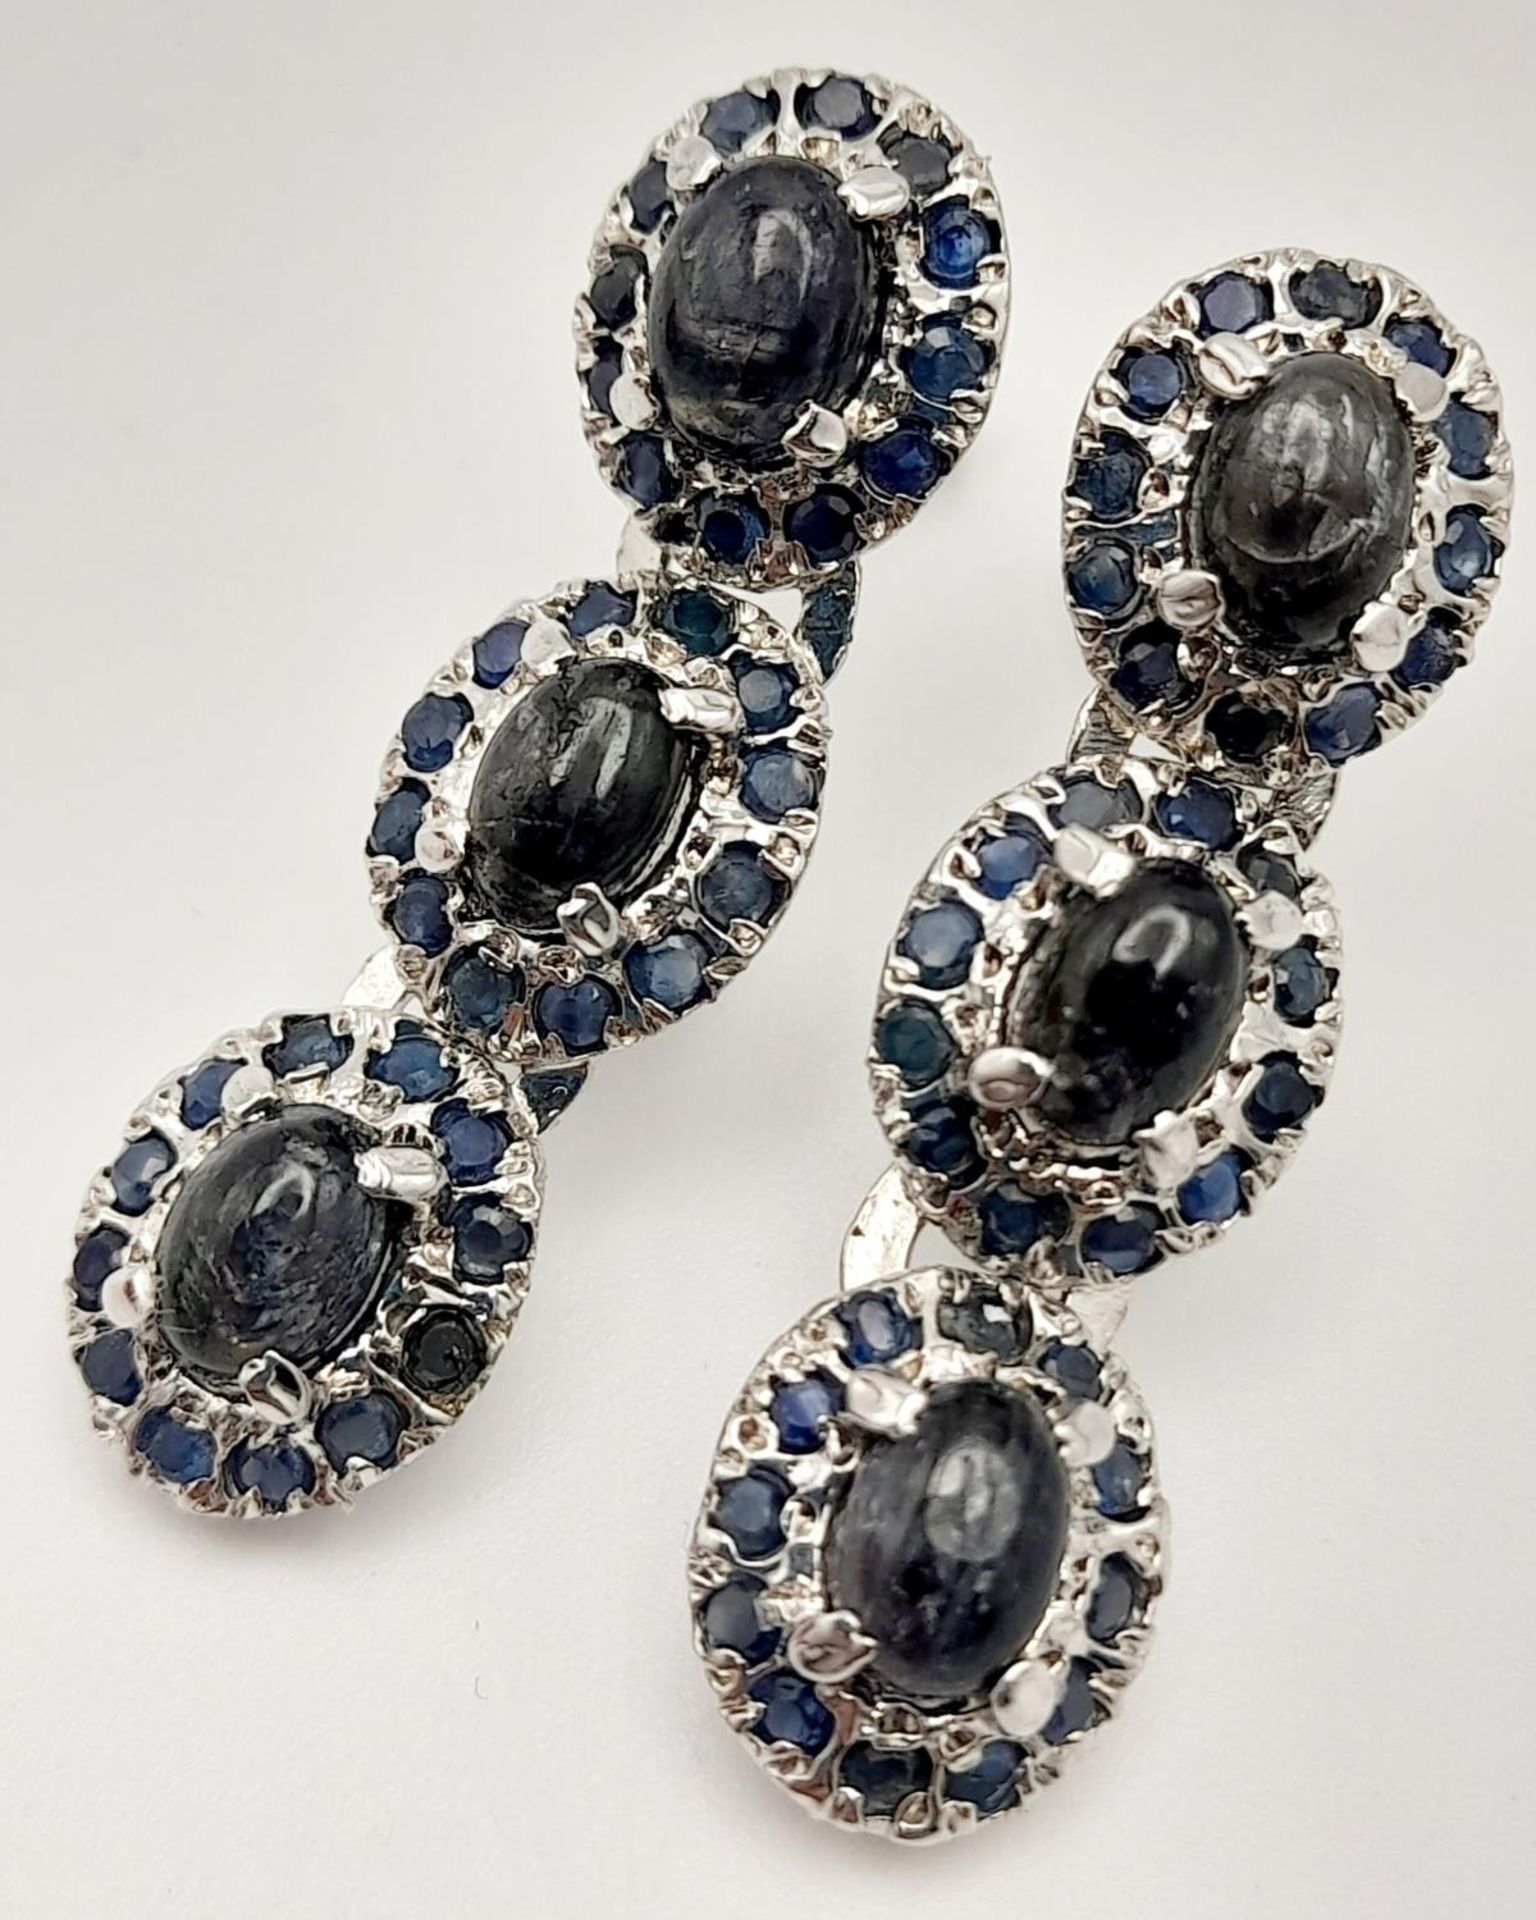 A Blue Sapphire Silver Choker Necklace with Matching Drop Earrings. Both set in 925 sterling silver. - Image 2 of 6